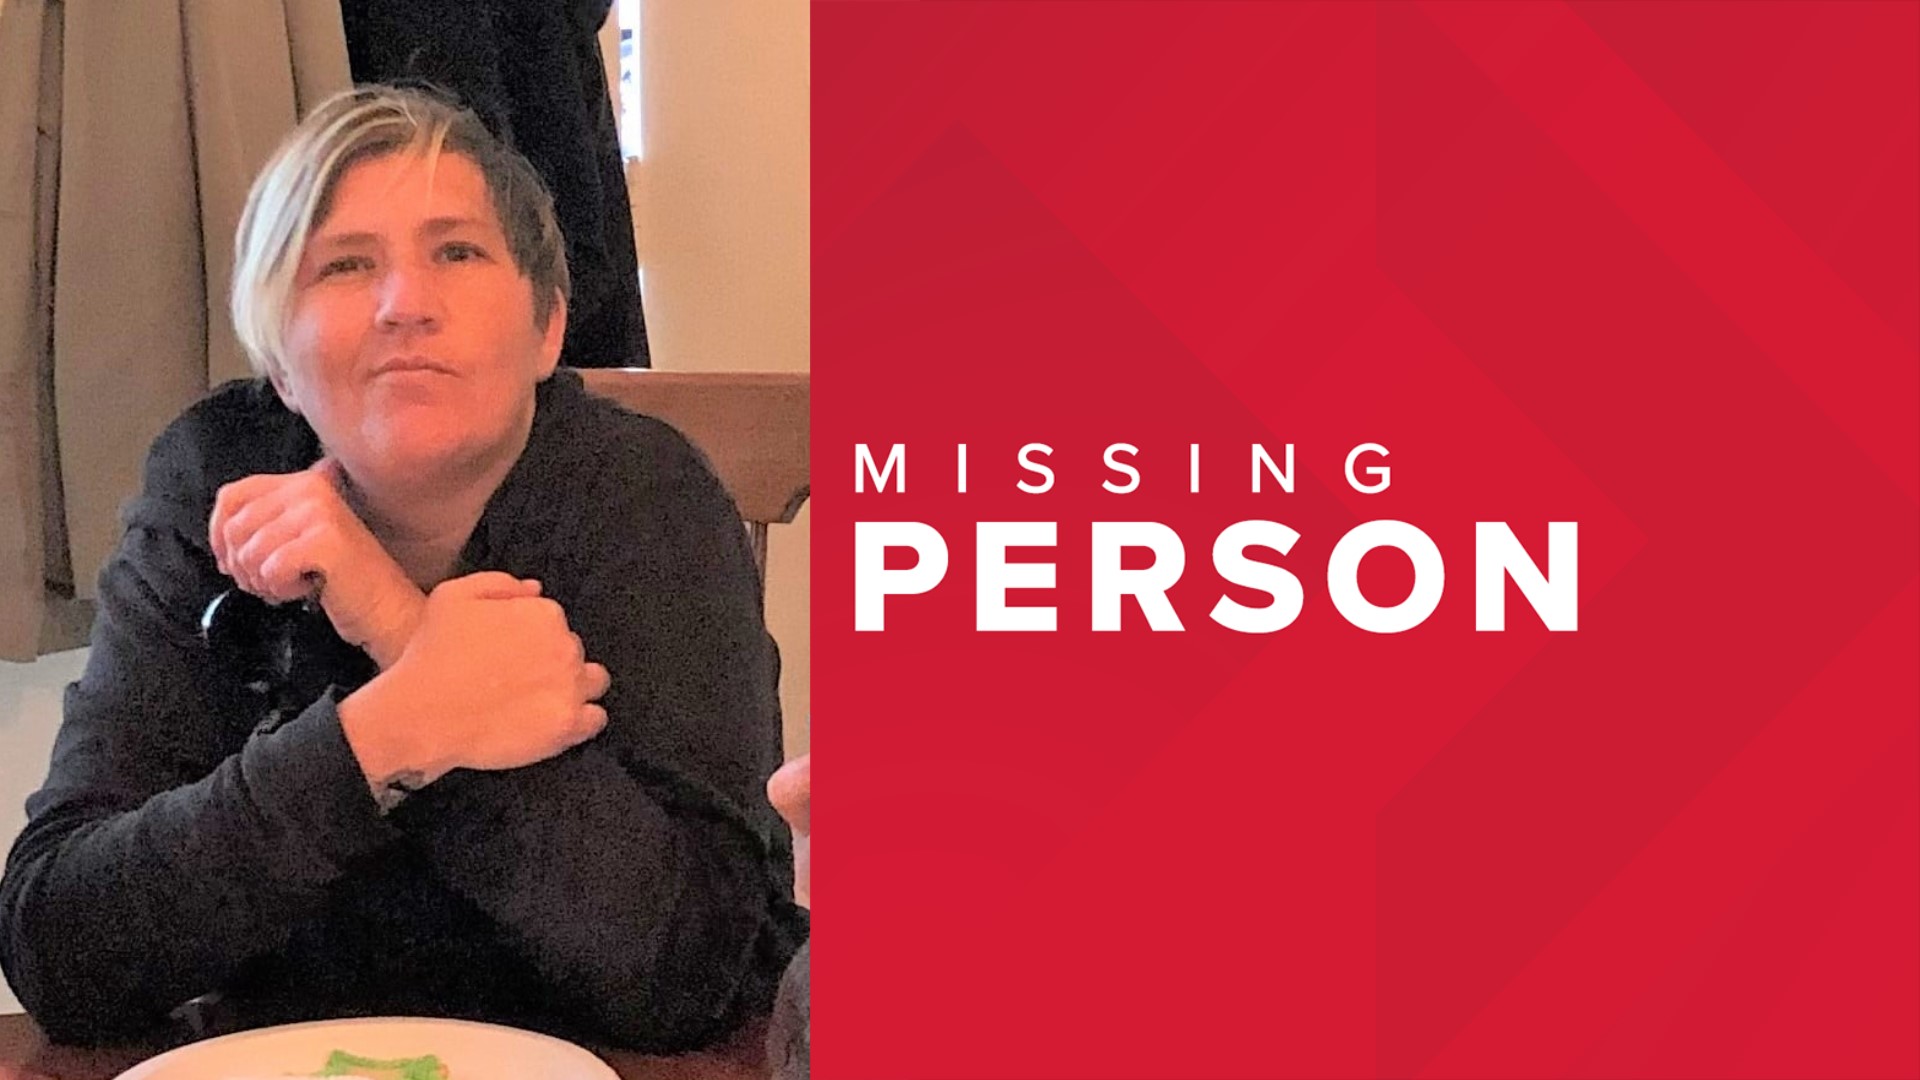 Help find Kasie Ann Price. Texas EquuSearch said she hasn't been seen since she left her home on March 3.